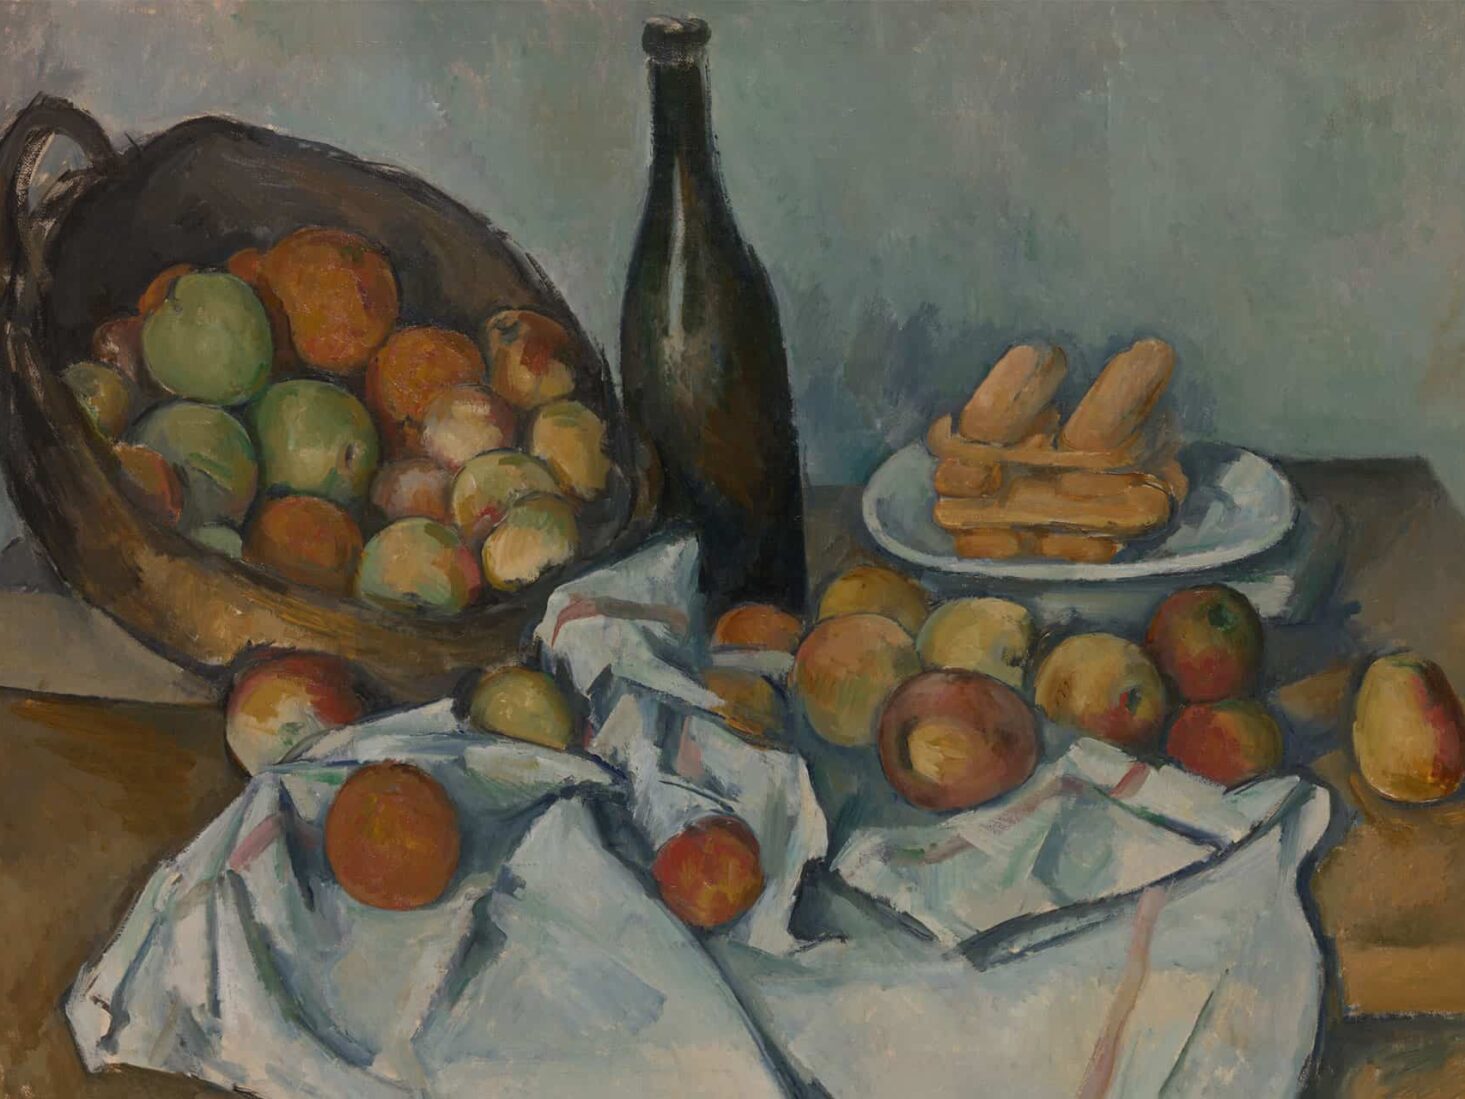 Paul Cezanne The Basket of Apples, c. 1893. The Art Institute of Chicago, Helen Birch Bartlett Memorial Collection